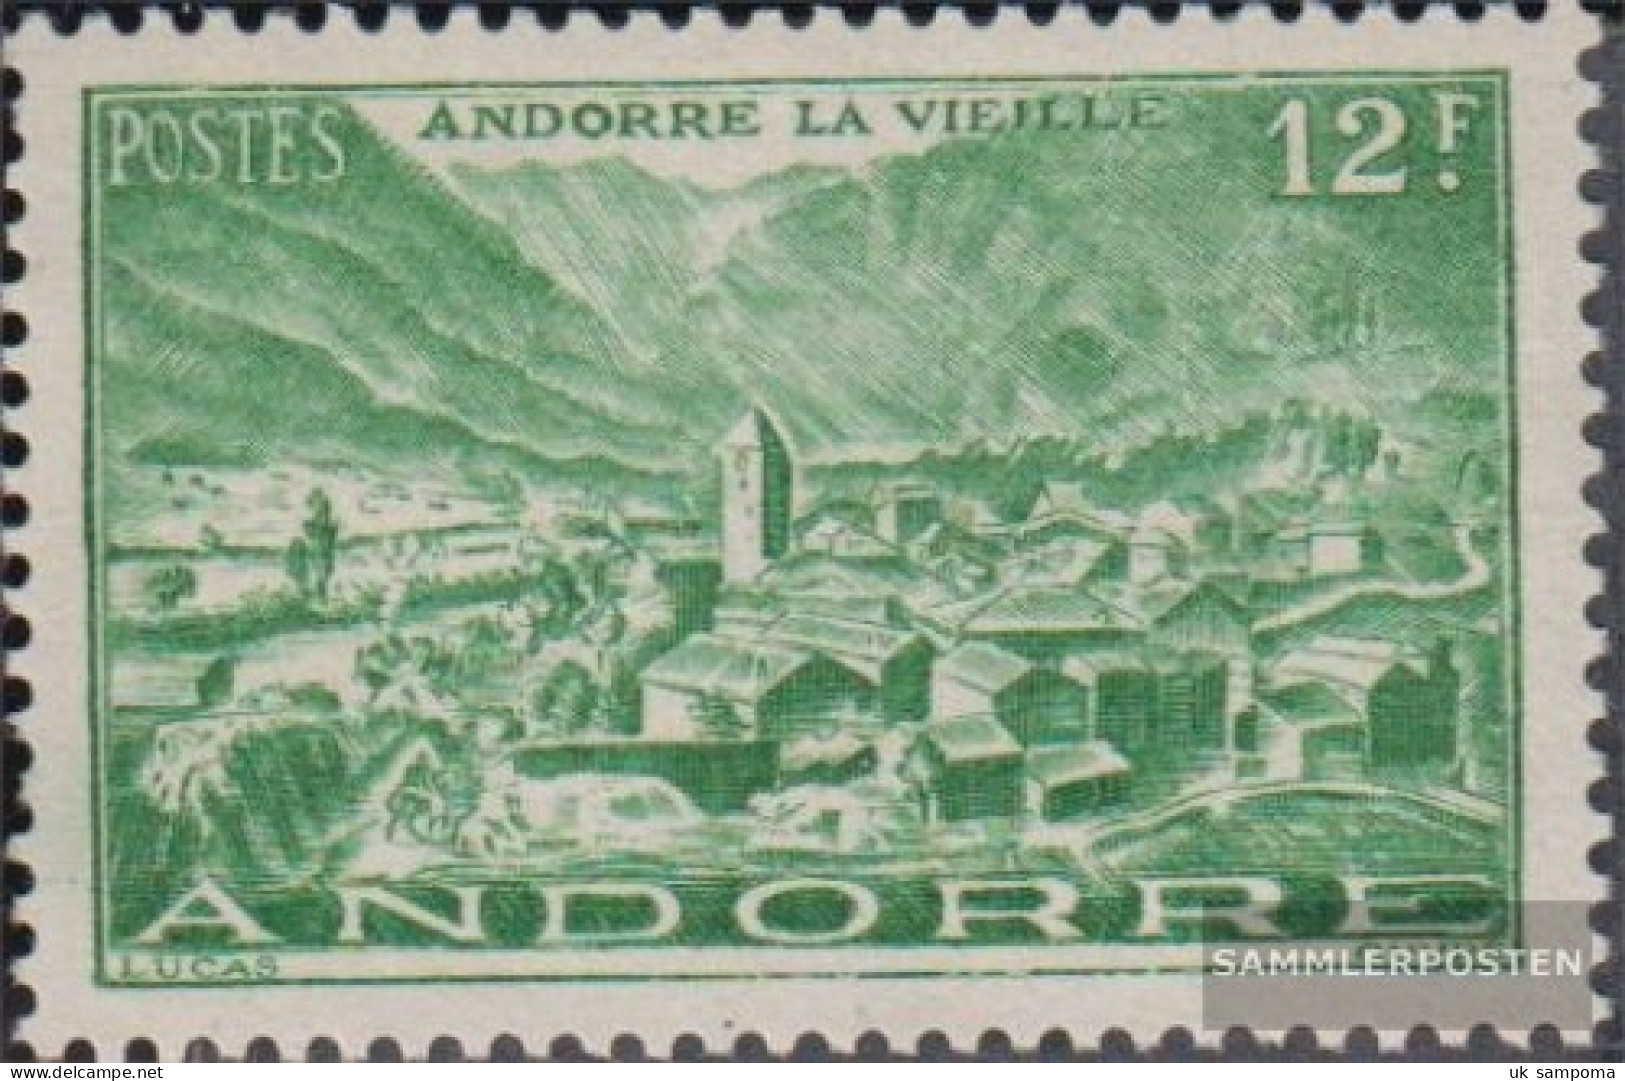 Andorra - French Post 128 Unmounted Mint / Never Hinged 1944 Landscapes - Carnets